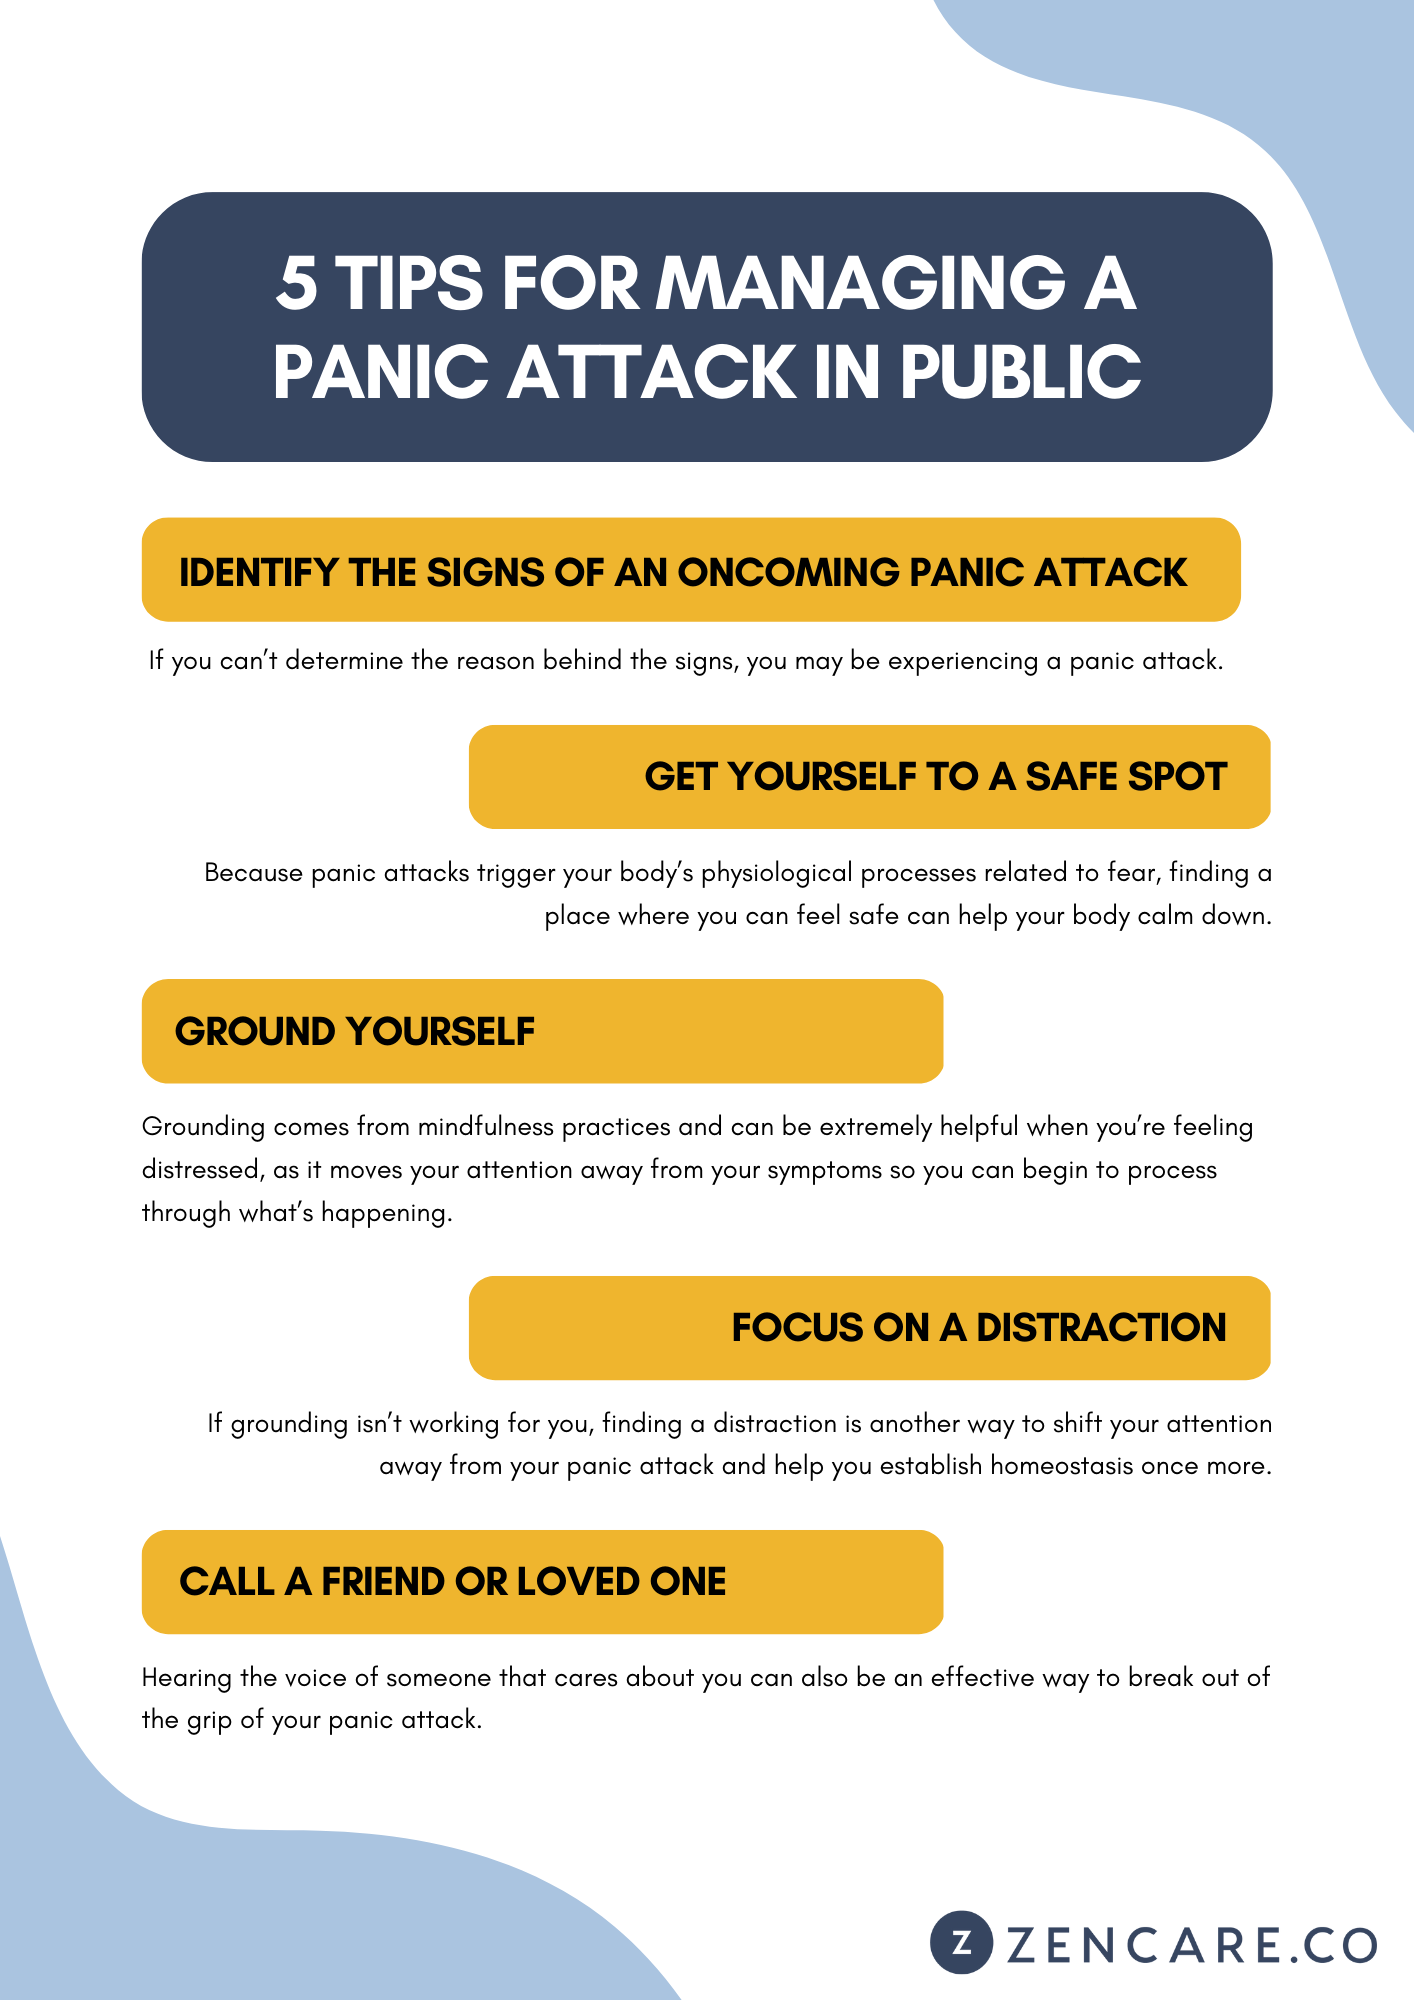 5 Tips for Managing a Panic Attack in Public Guide by Zencare